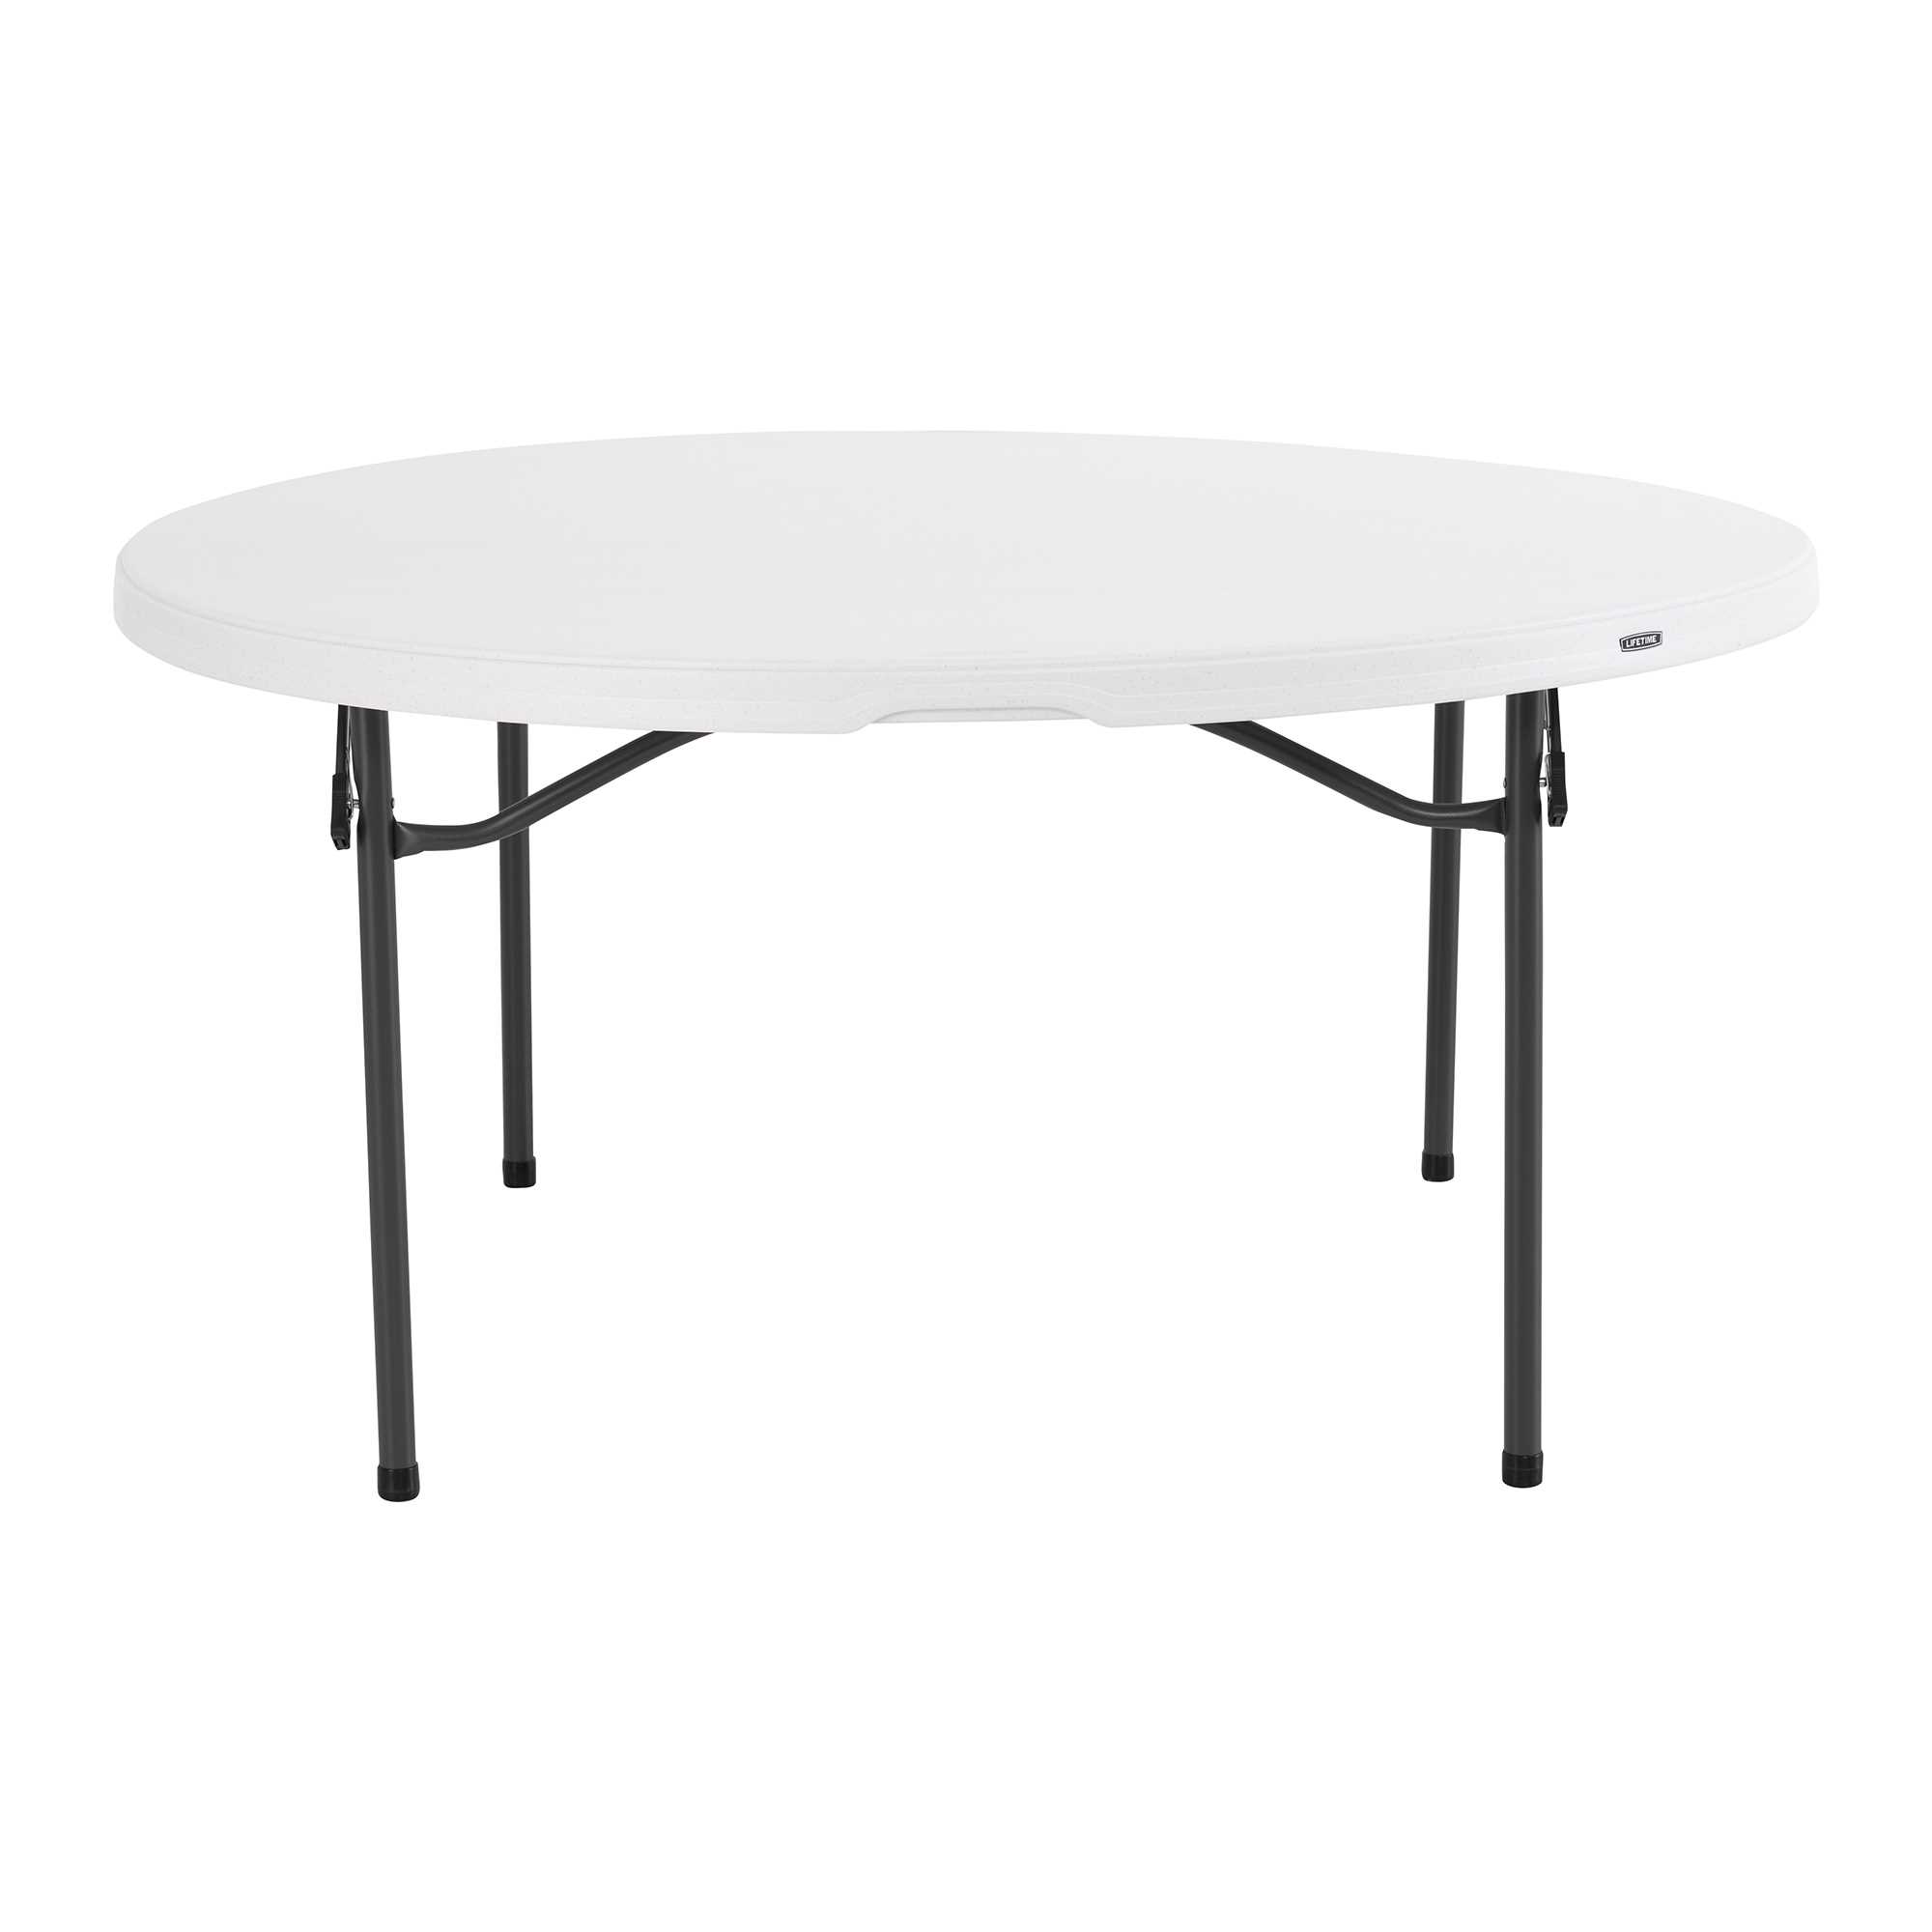 60-inch Round folding table 152 cm Dia / 8 people / NESTING heavy commercial